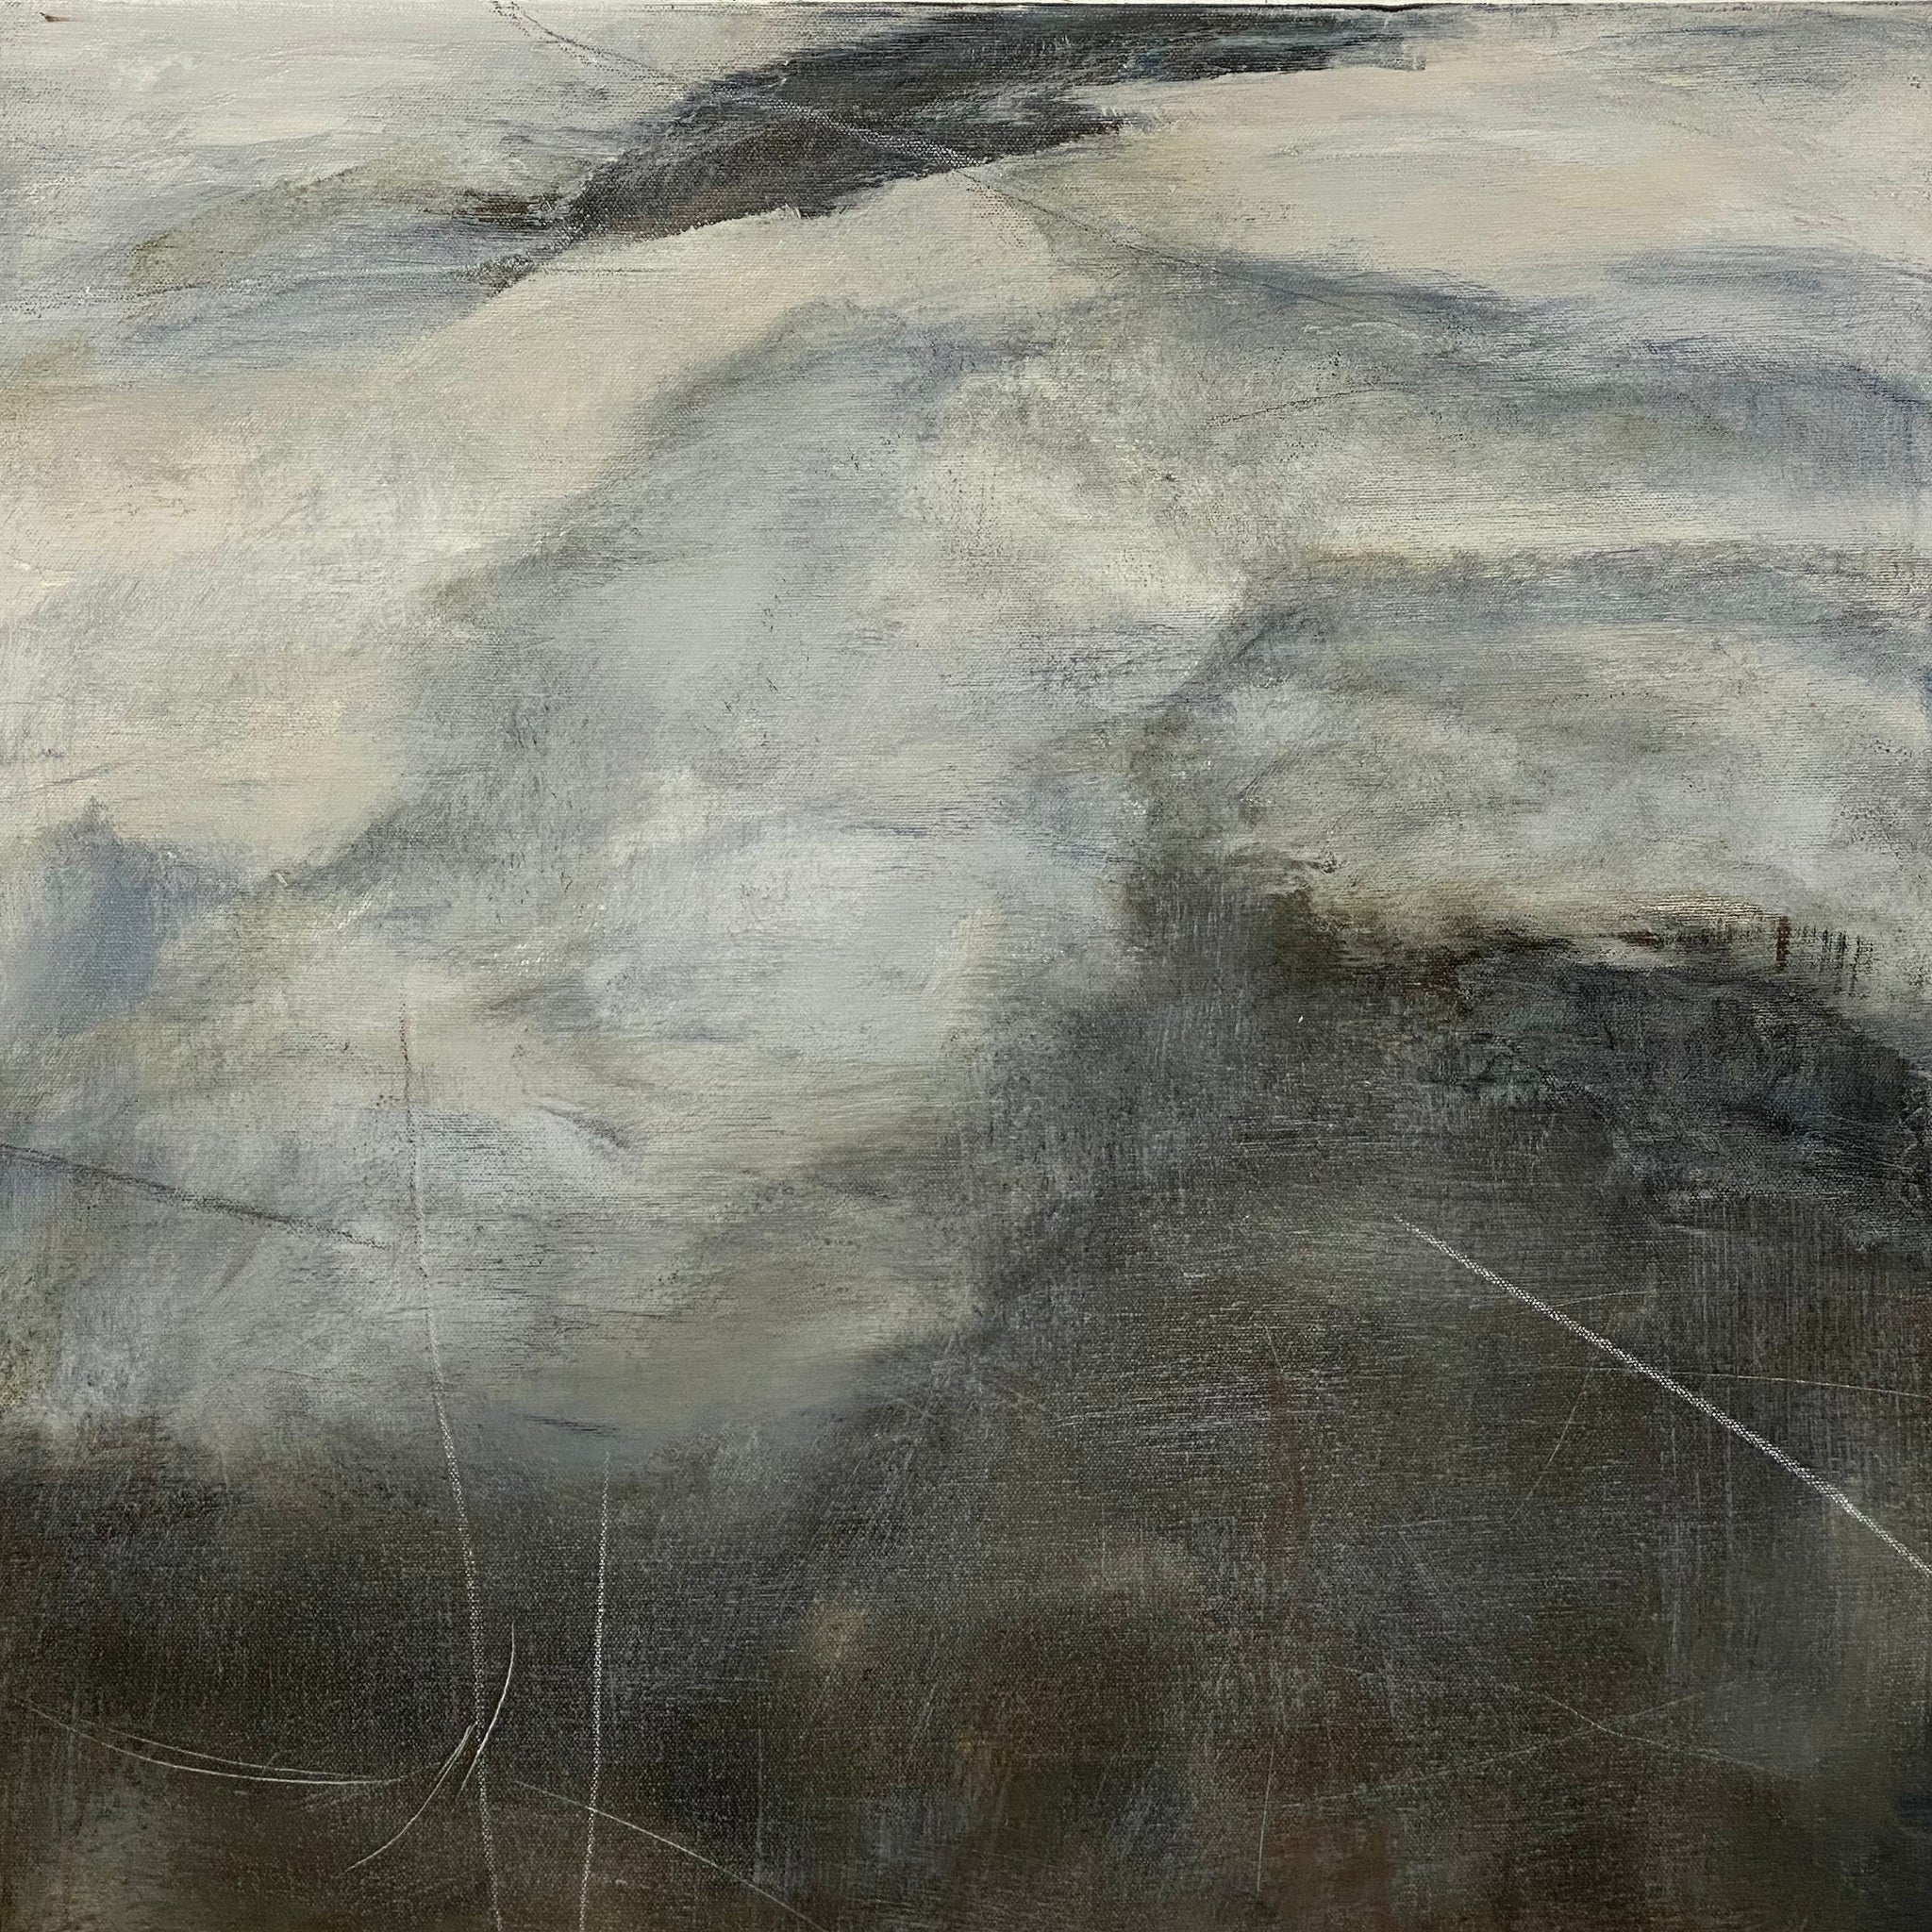 Juanita Bellavance, Changing terrain, From the Chestatee River portfolio, 2021, Acrylic on canvas, 24 x 24 inches.